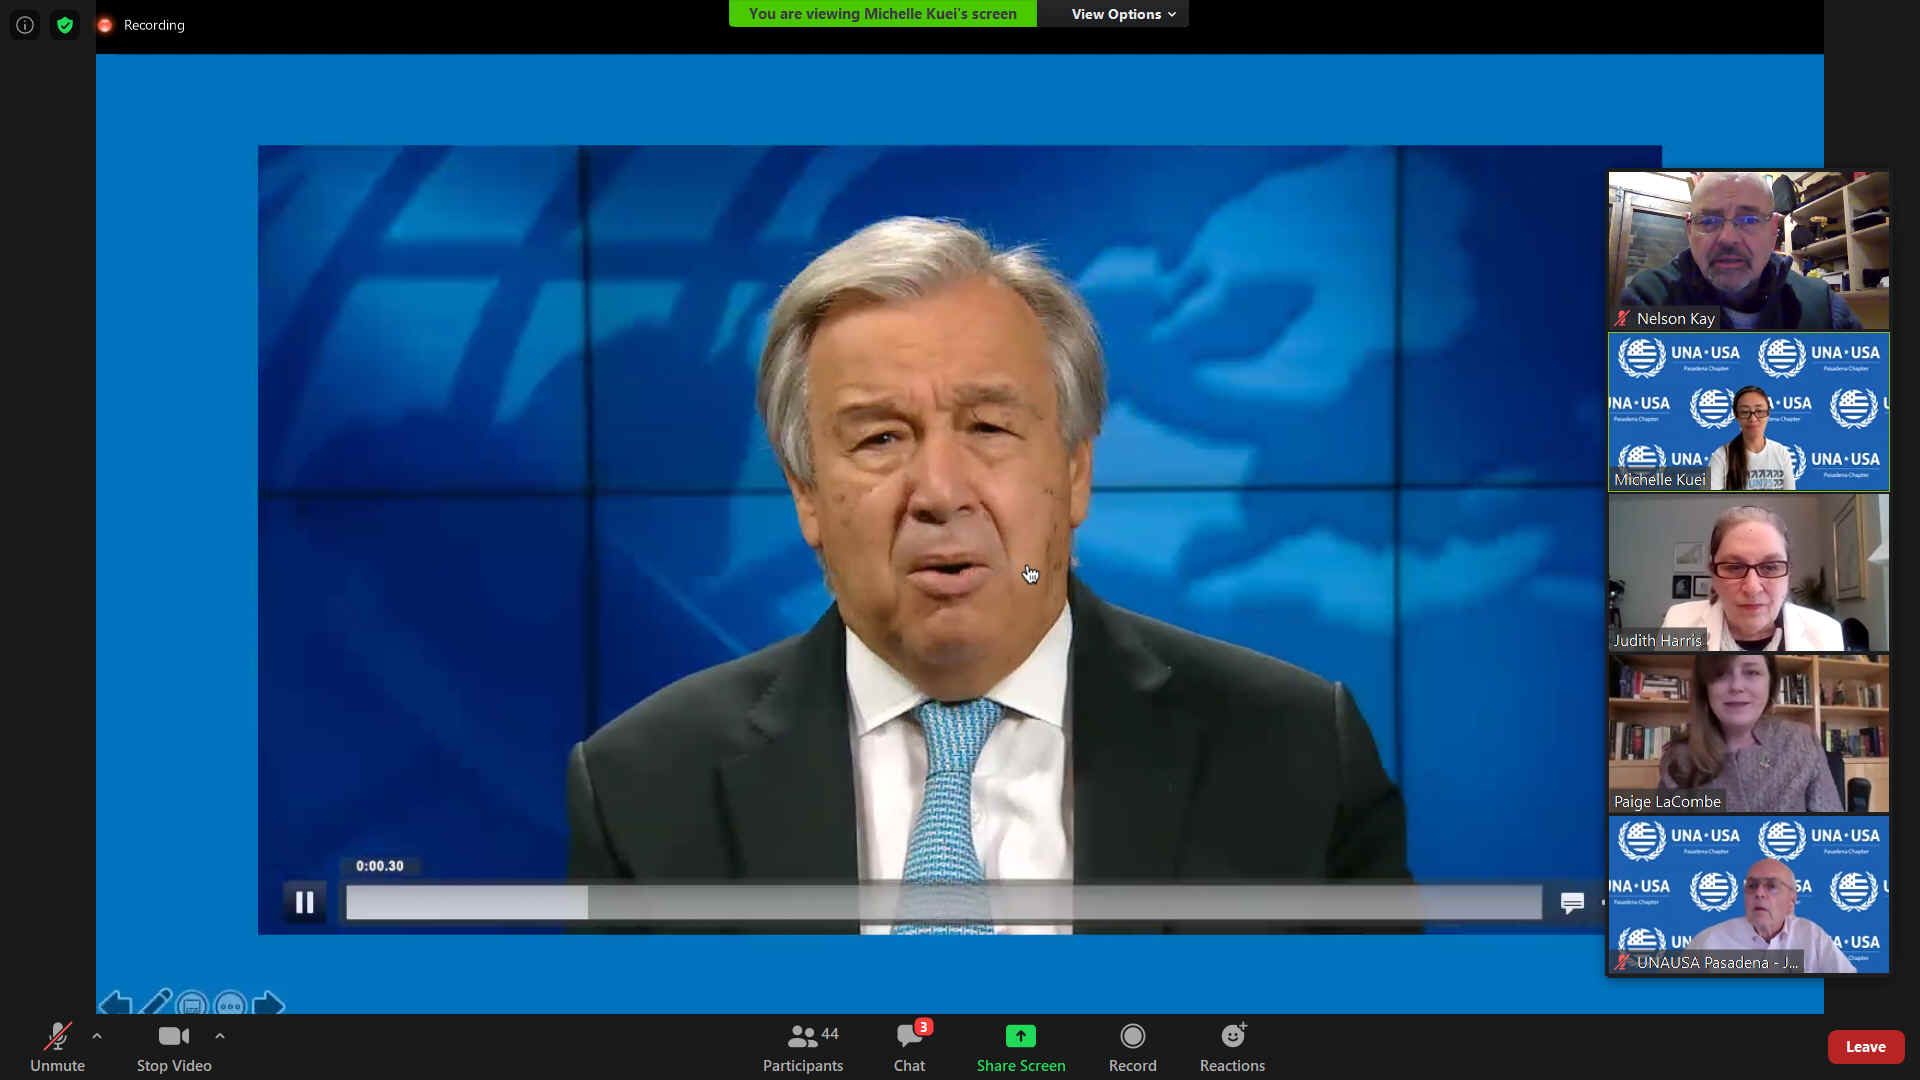 Antnio Guterres is the secretary general of the United Nations